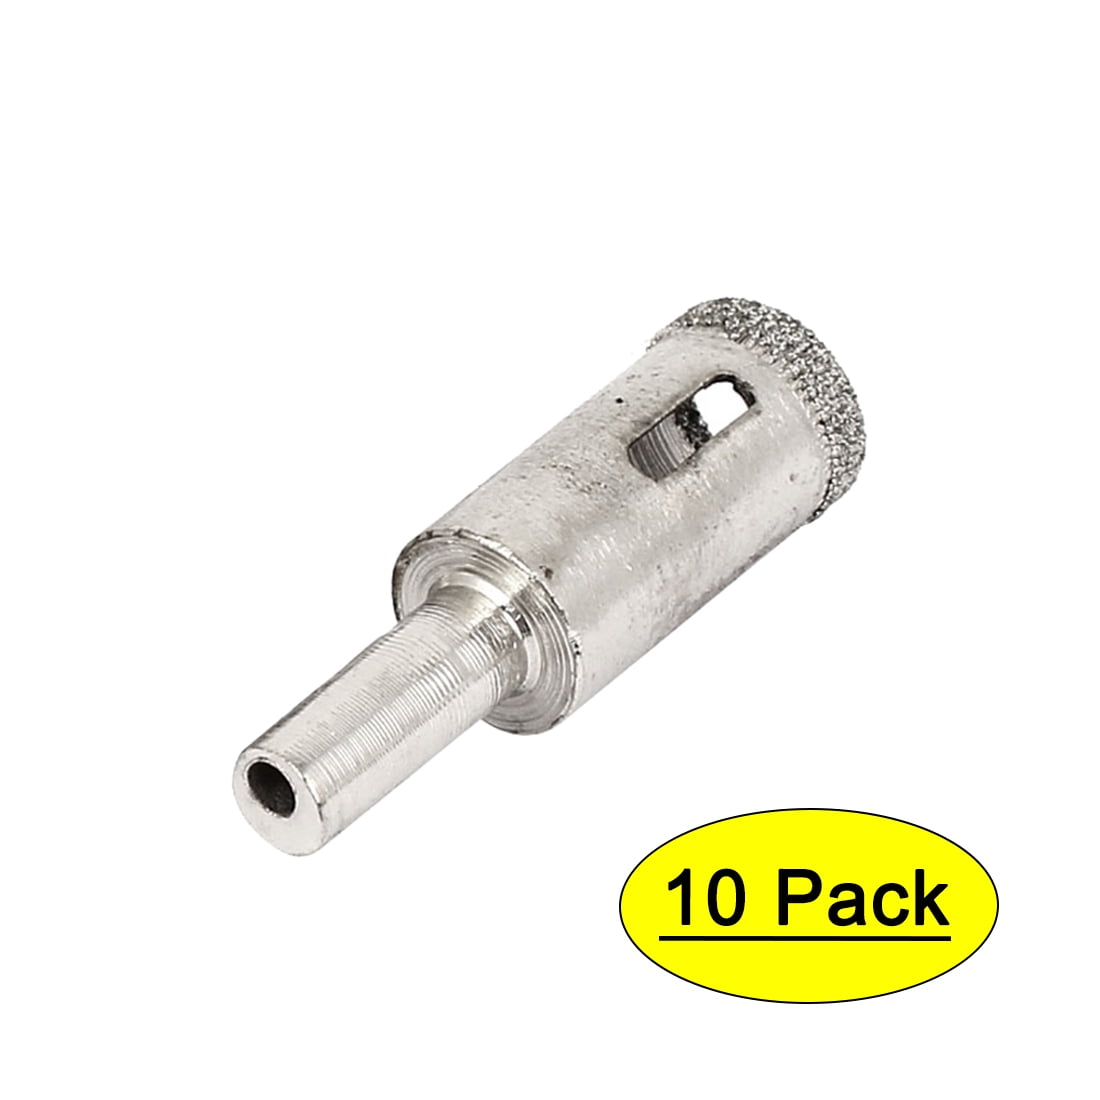 Details about   3X 25mm Diamond Coated Drill Bits Hole Saw Metal Set Glass Marble Granite Tile@